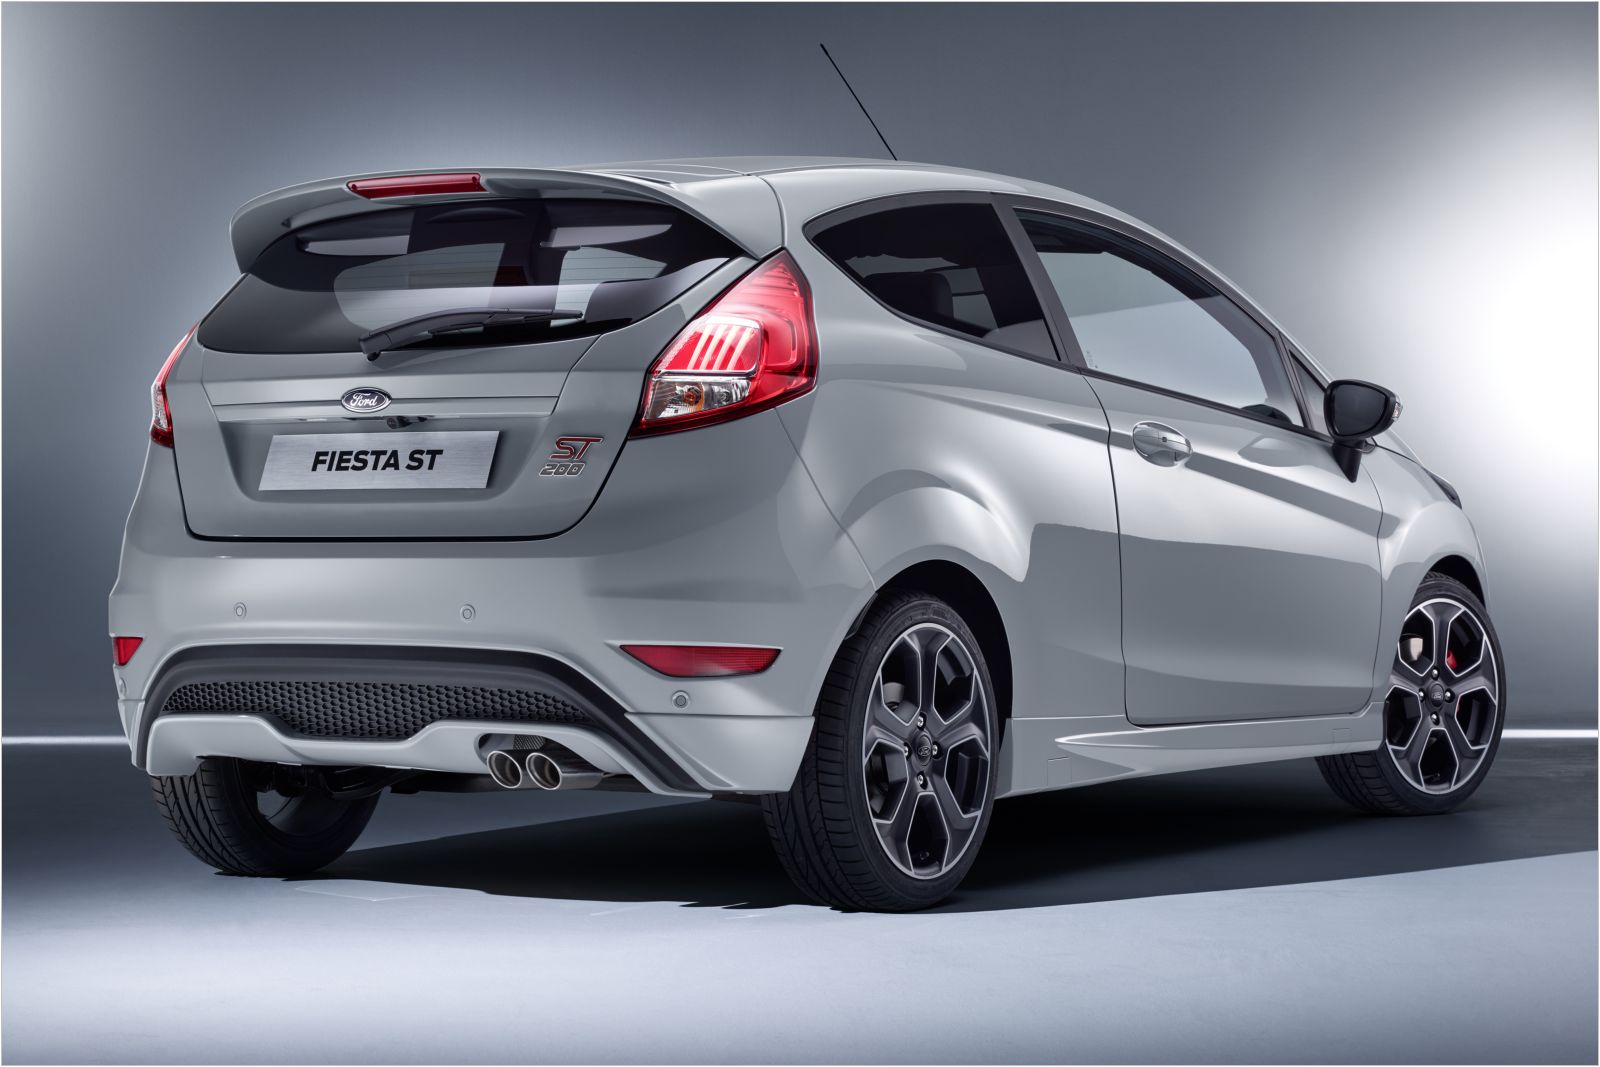 Ford Fiesta ST200, 1600x1067px, img-2